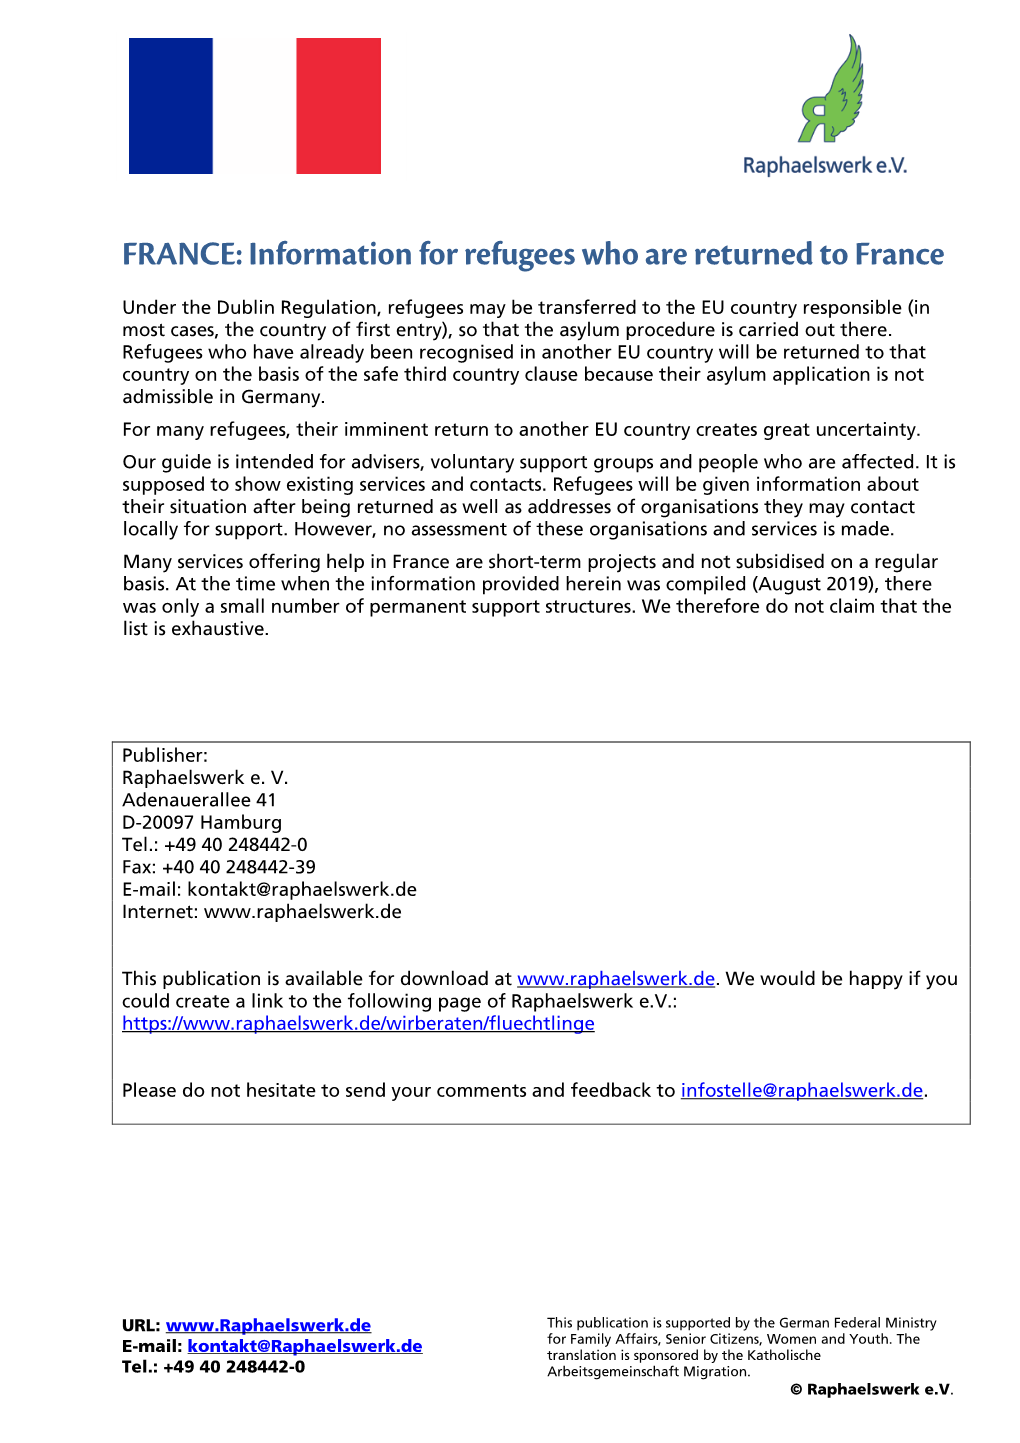 Information for Refugees Who Are Returned to France